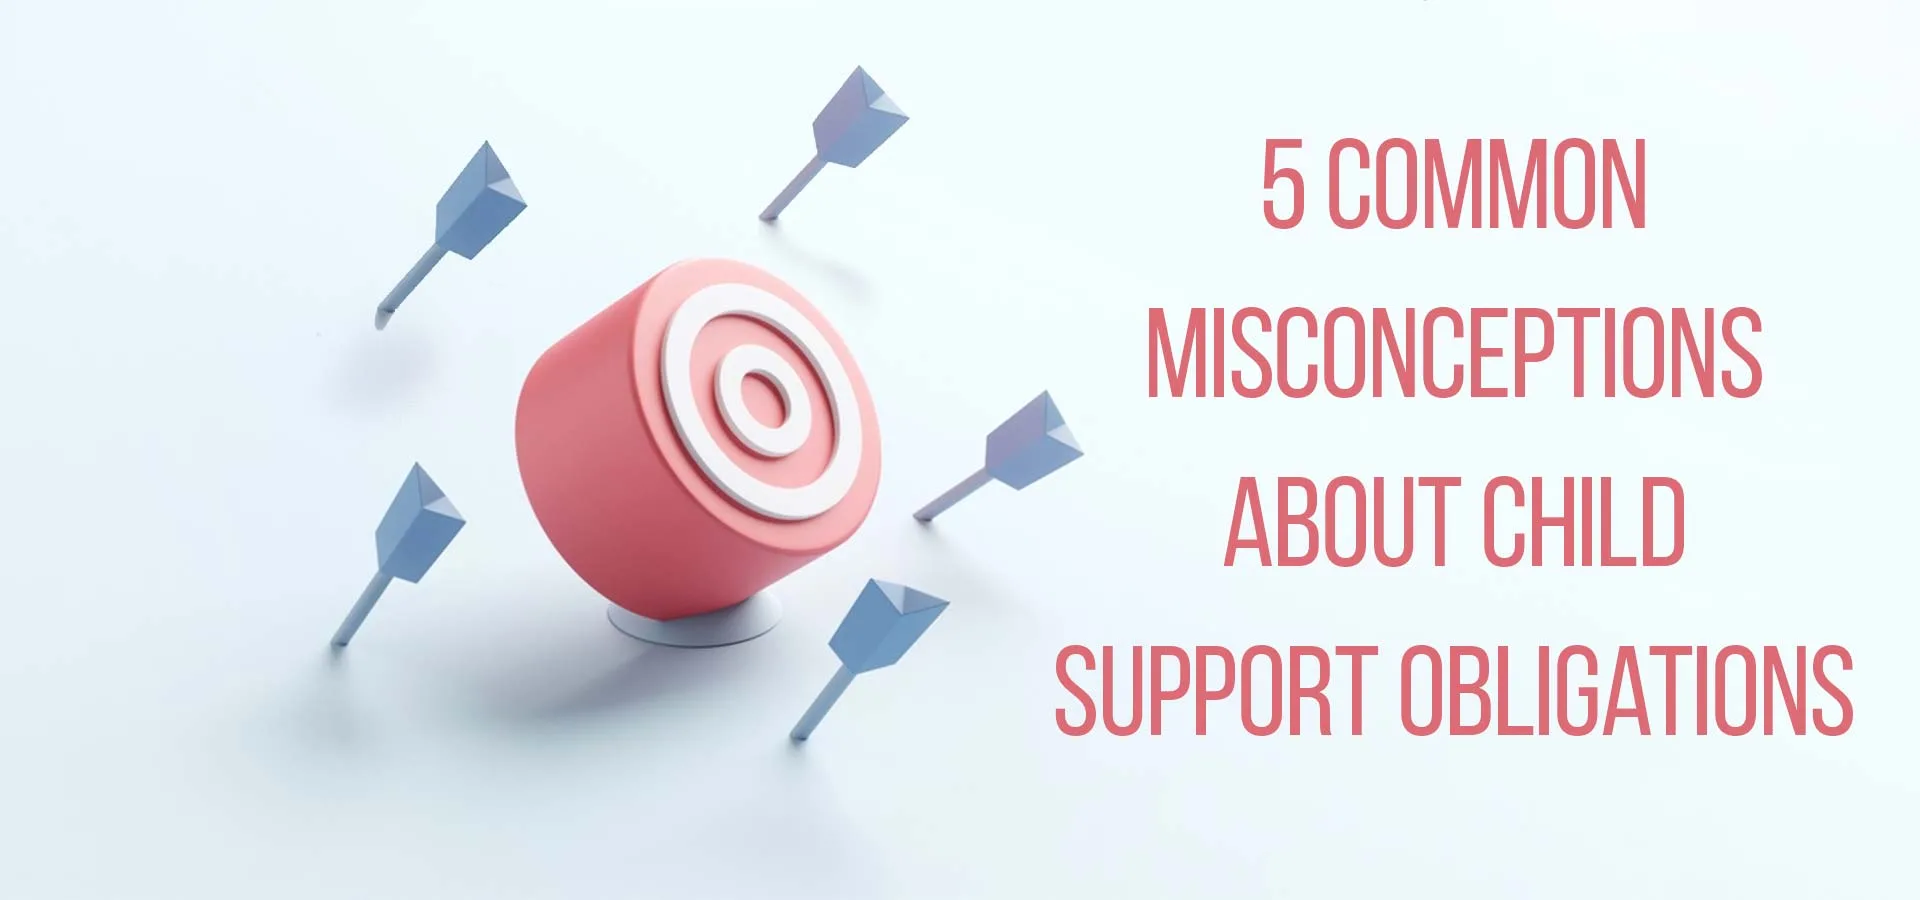 5 Common Misconceptions about Child Support Obligations